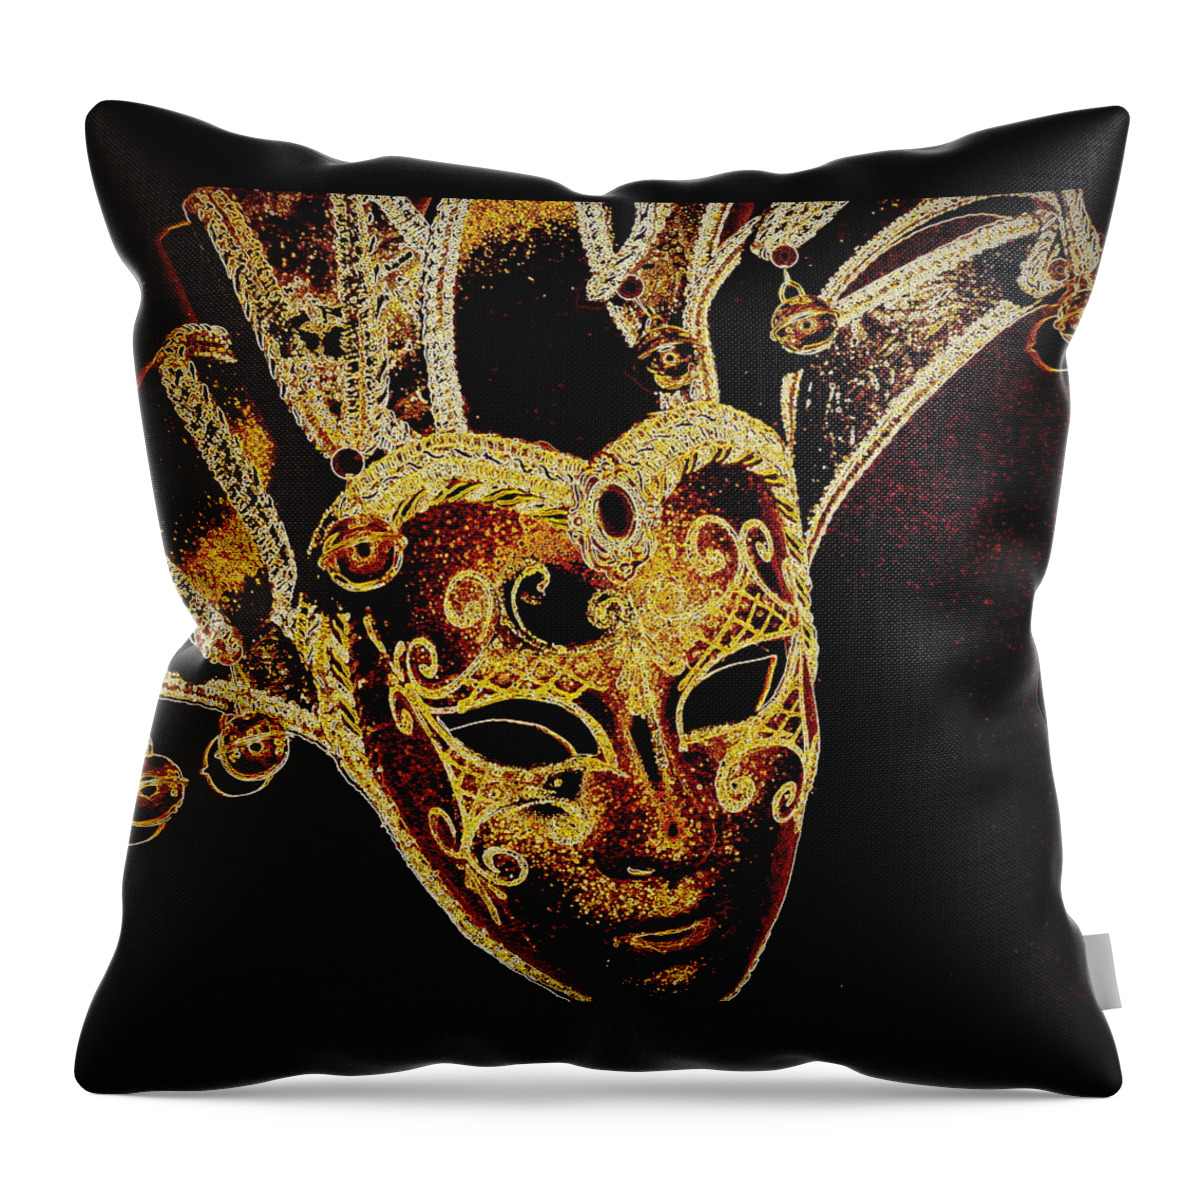 Mask Throw Pillow featuring the photograph Golden Mask by Lori Seaman